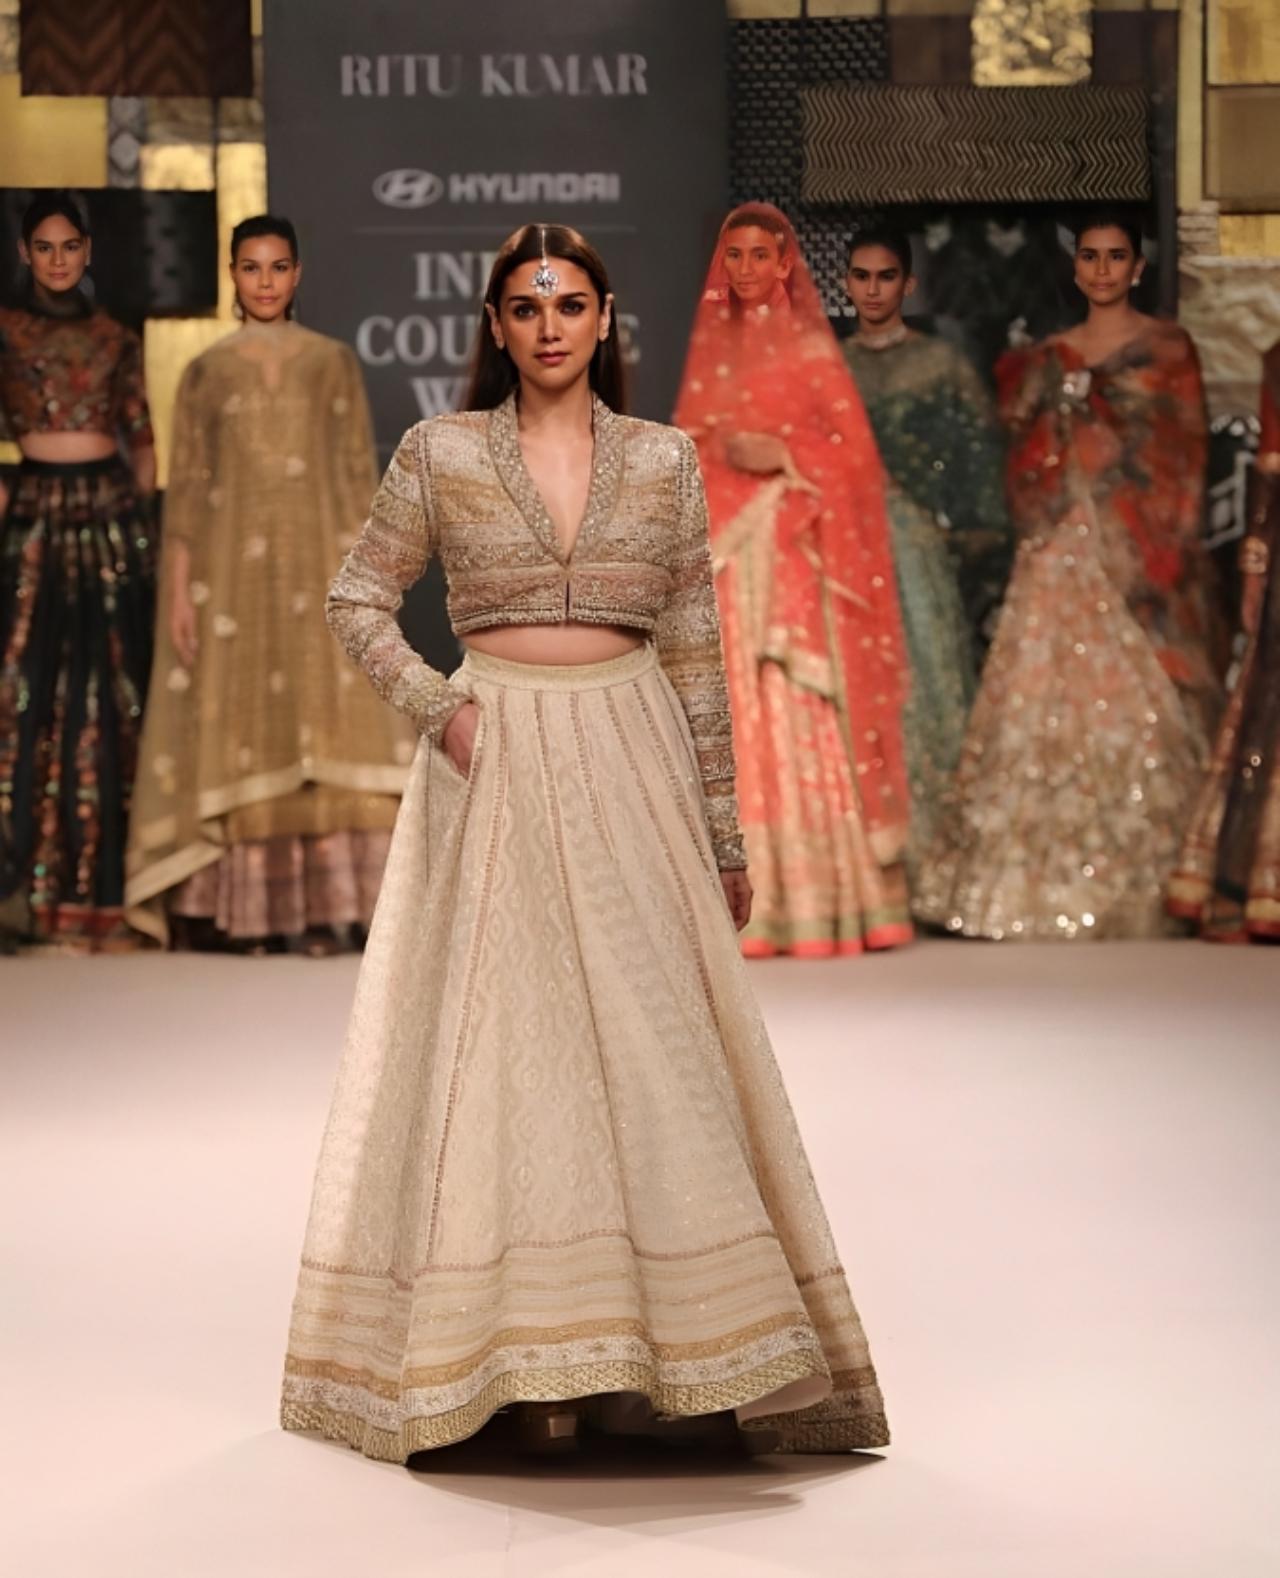 Actress Aditi Rao Hydari was the highlight of this show, stunning in an ivory Gazal jacket featuring gold zardozi work and traditional Kashmiri designs, complemented by an embroidered lehenga